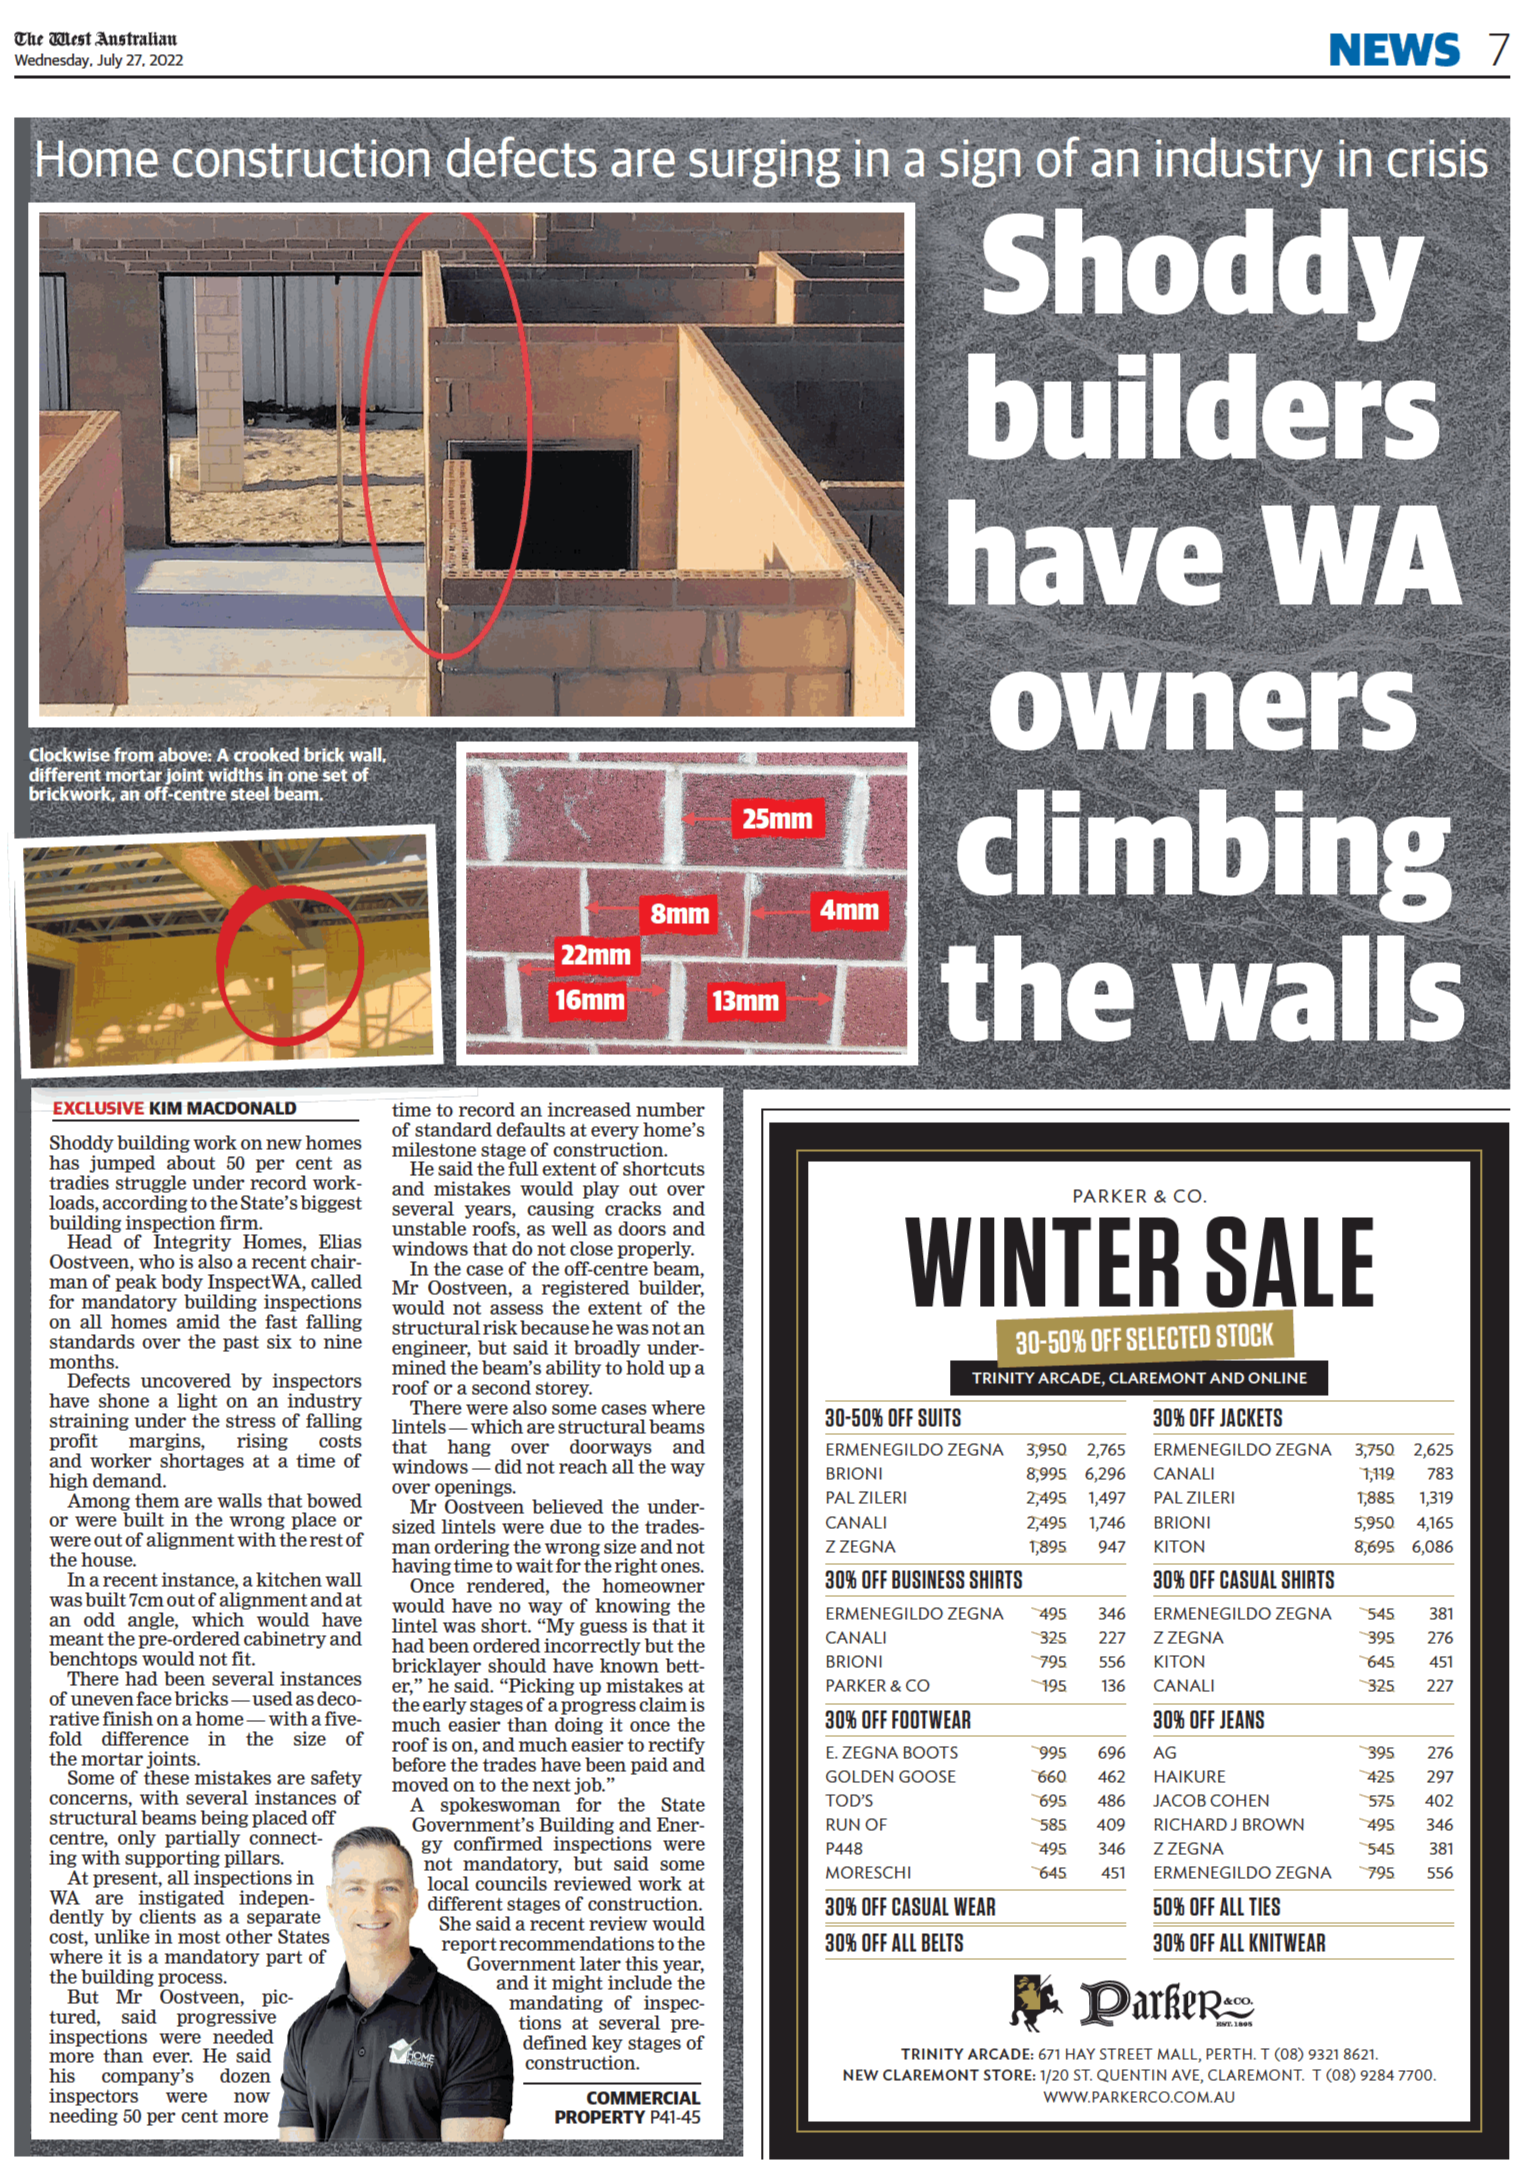 News article about home construction defects